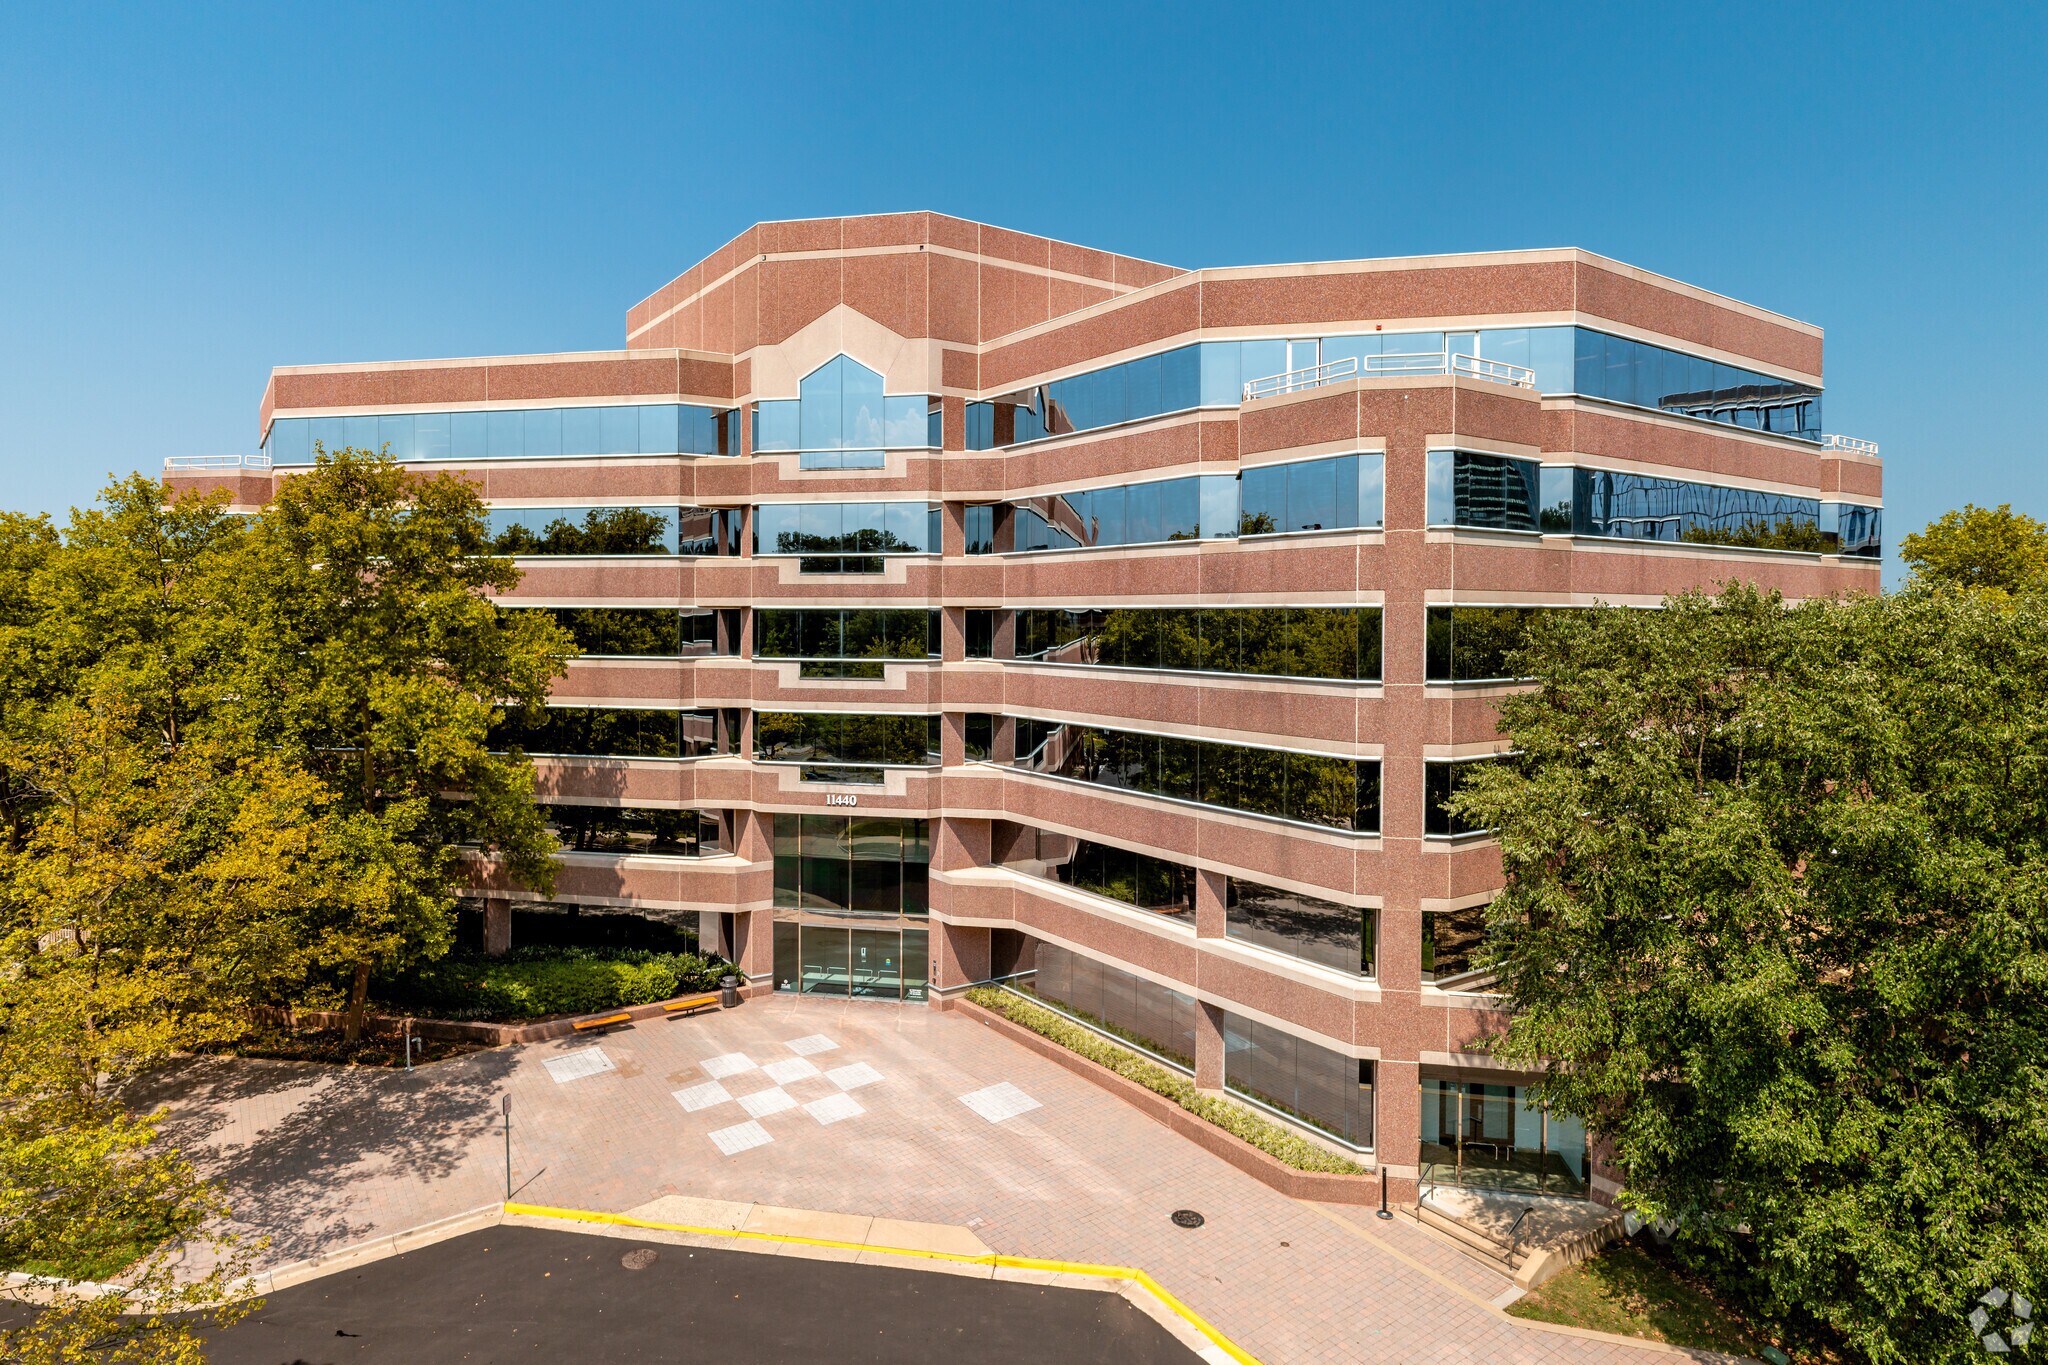 Penn State’s Applied Research Laboratory is moving into a nearly 35,000-square-foot space at 114400 Commerce Park Drive in Reston, Virginia. (CoStar)